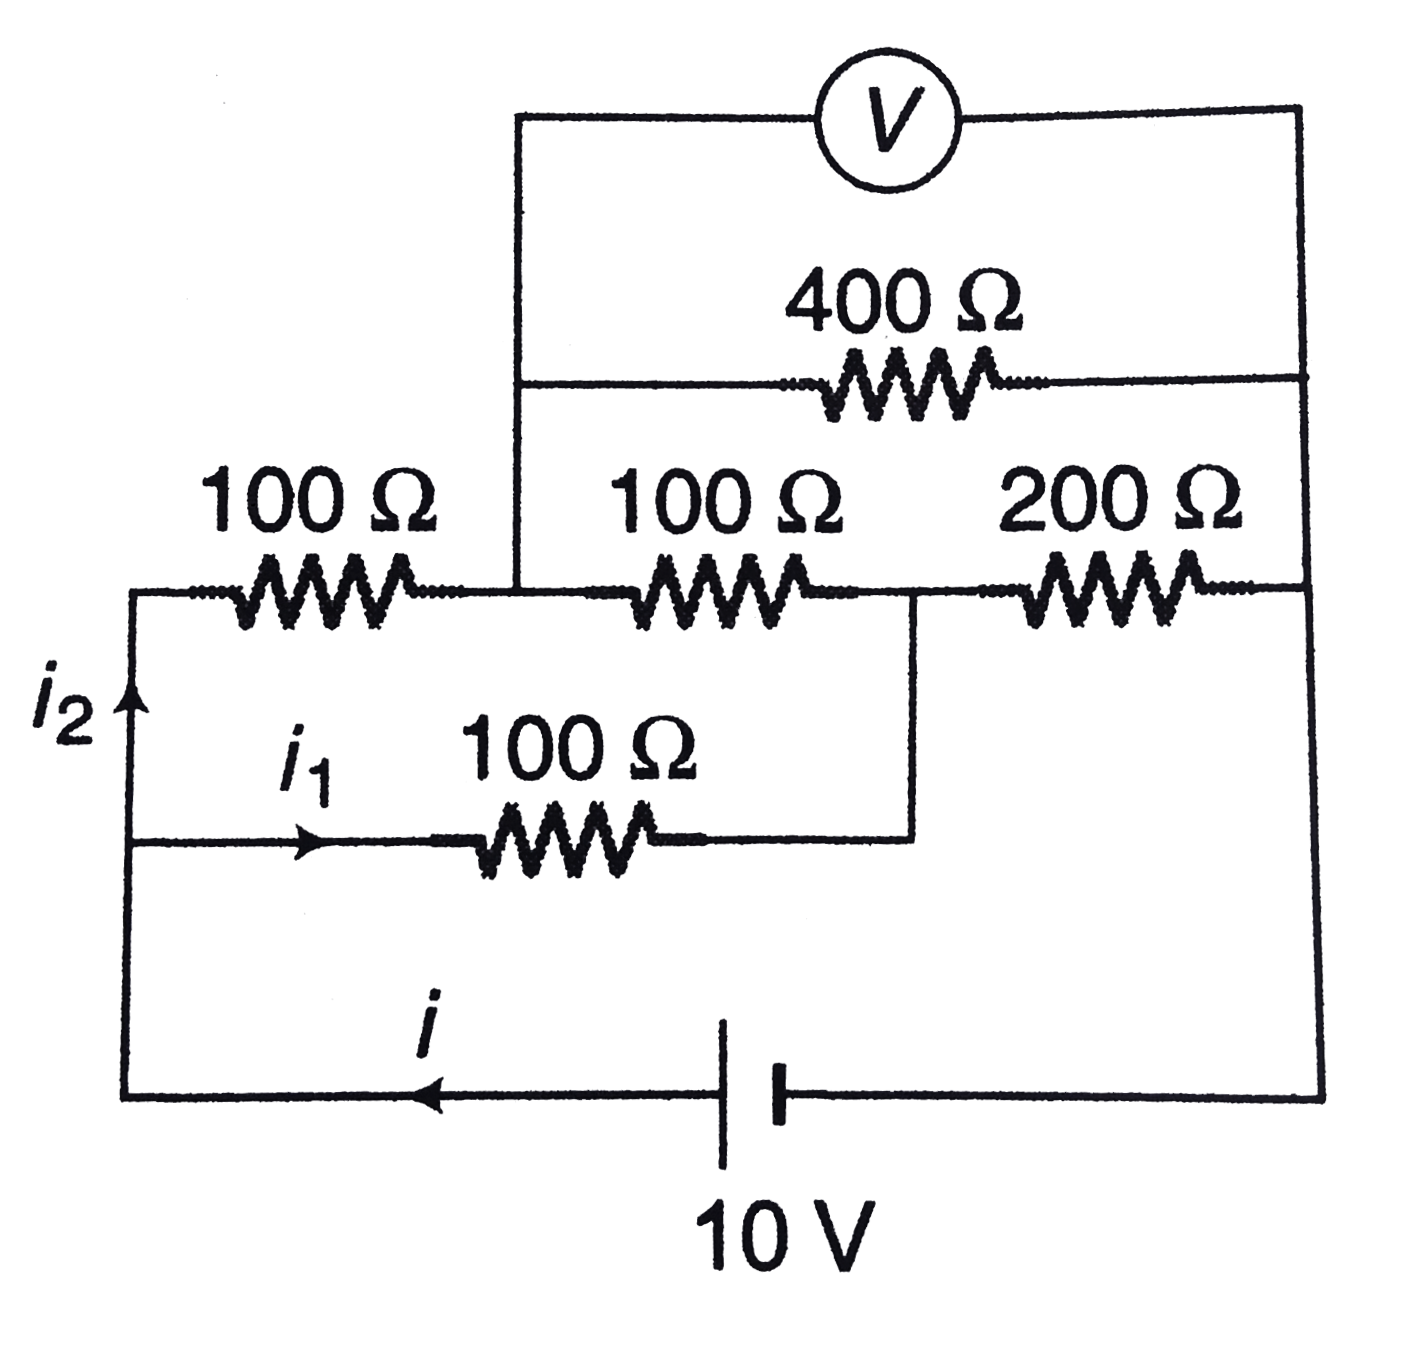 An electrical circuit is shown in figure. Calculate the potential difference across the resistor of 400 Omega as will be measured by the voltmeter Vof resistance 400 Omega either by applying Kirchhoff's rules or otherwise.